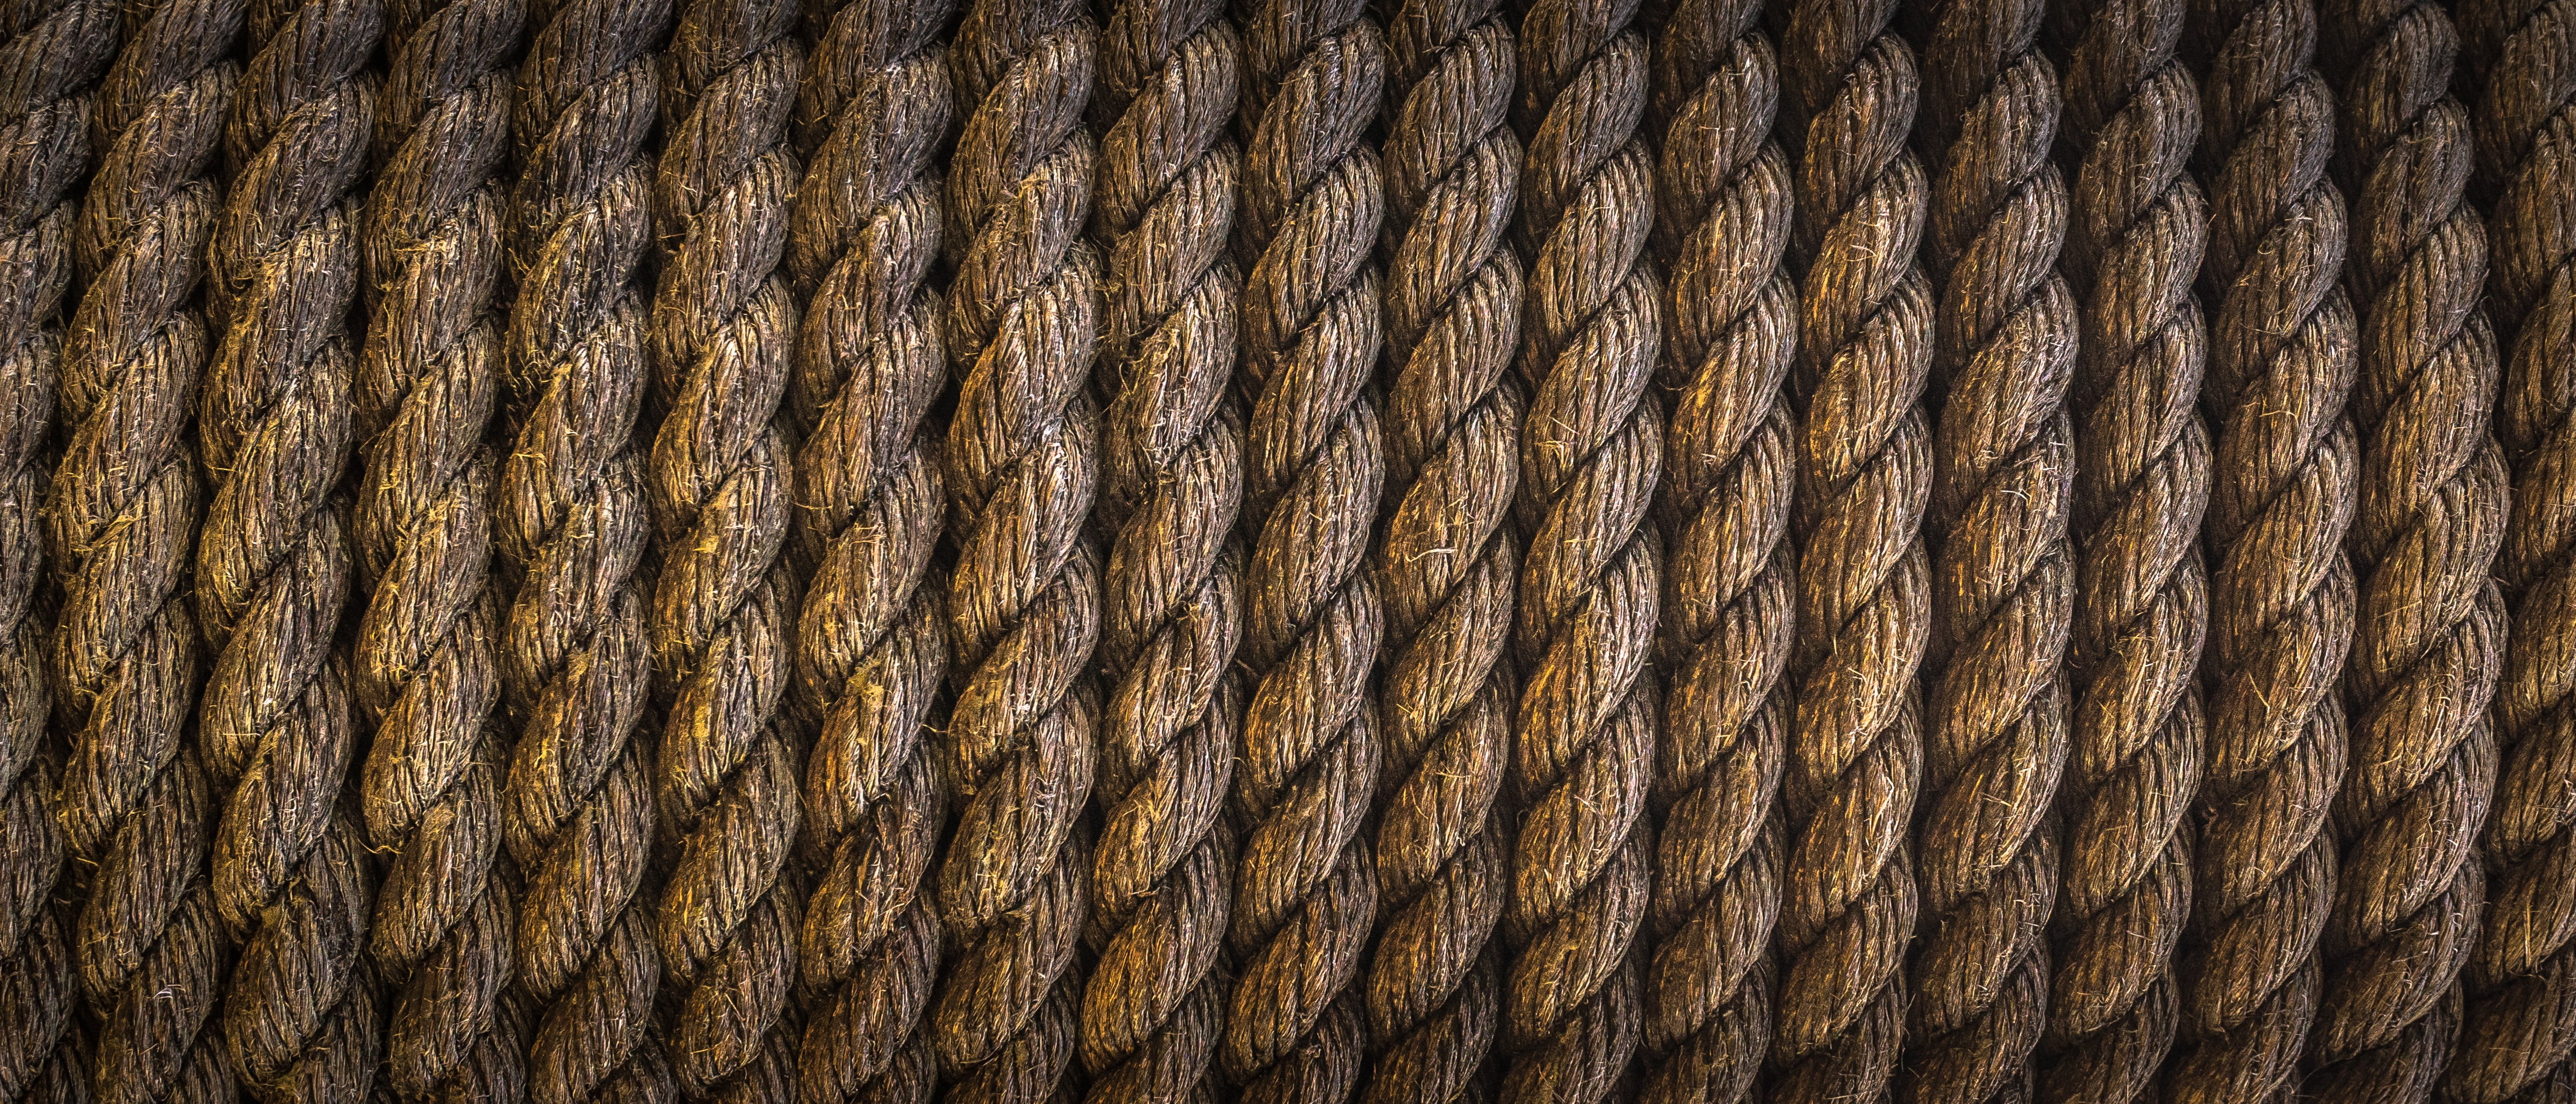 brown ropes, tether, knot, texture, background, pattern, textured